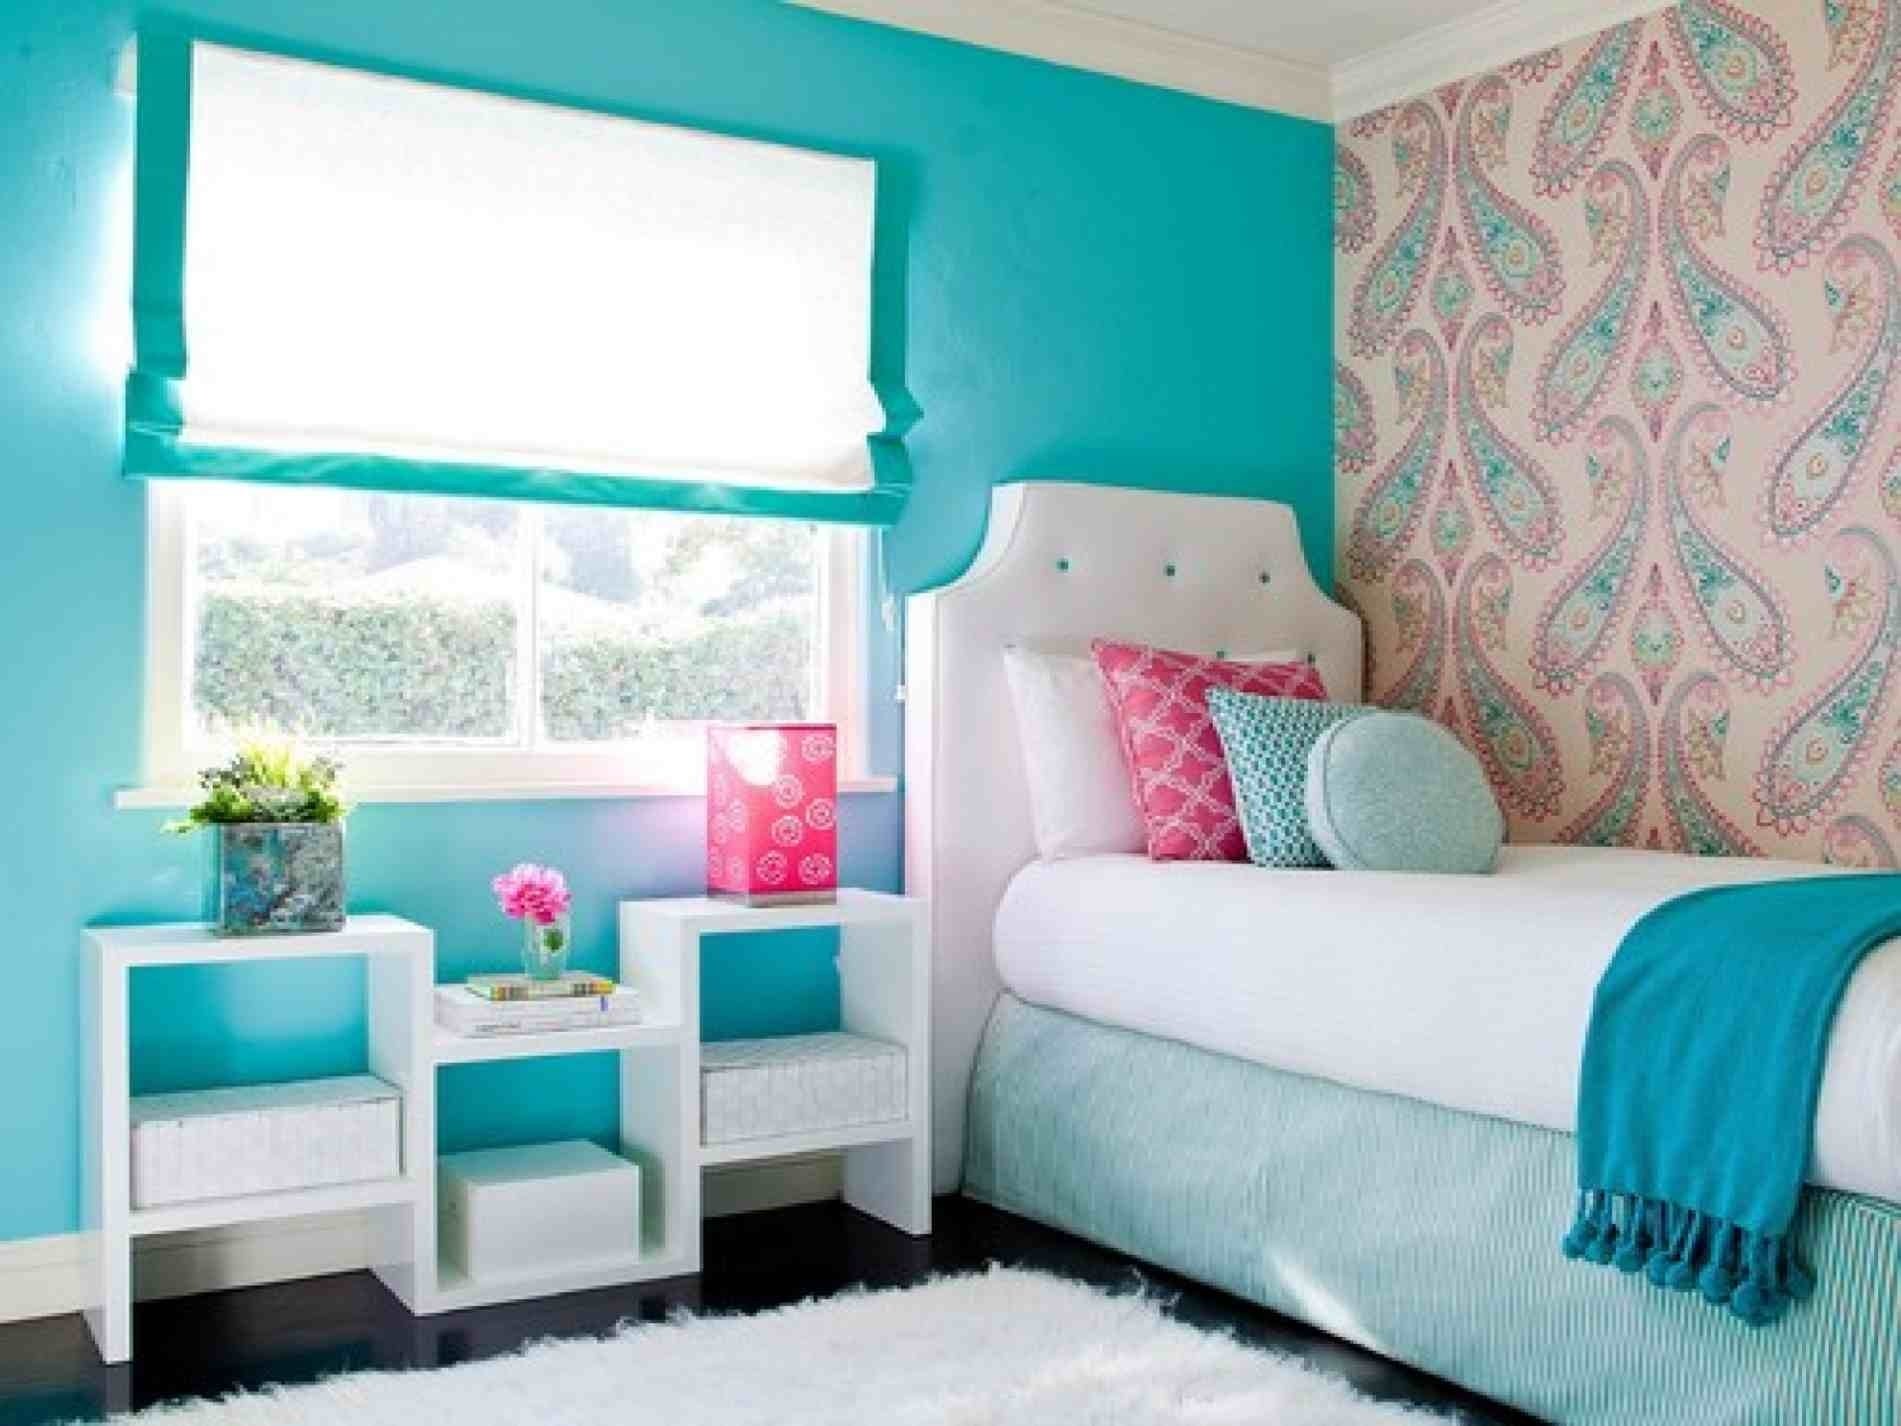 10 Most Recommended Small Bedroom Ideas For Teenage Girls small bedroom design ideas for teenage homes and gardens bedroom 2023